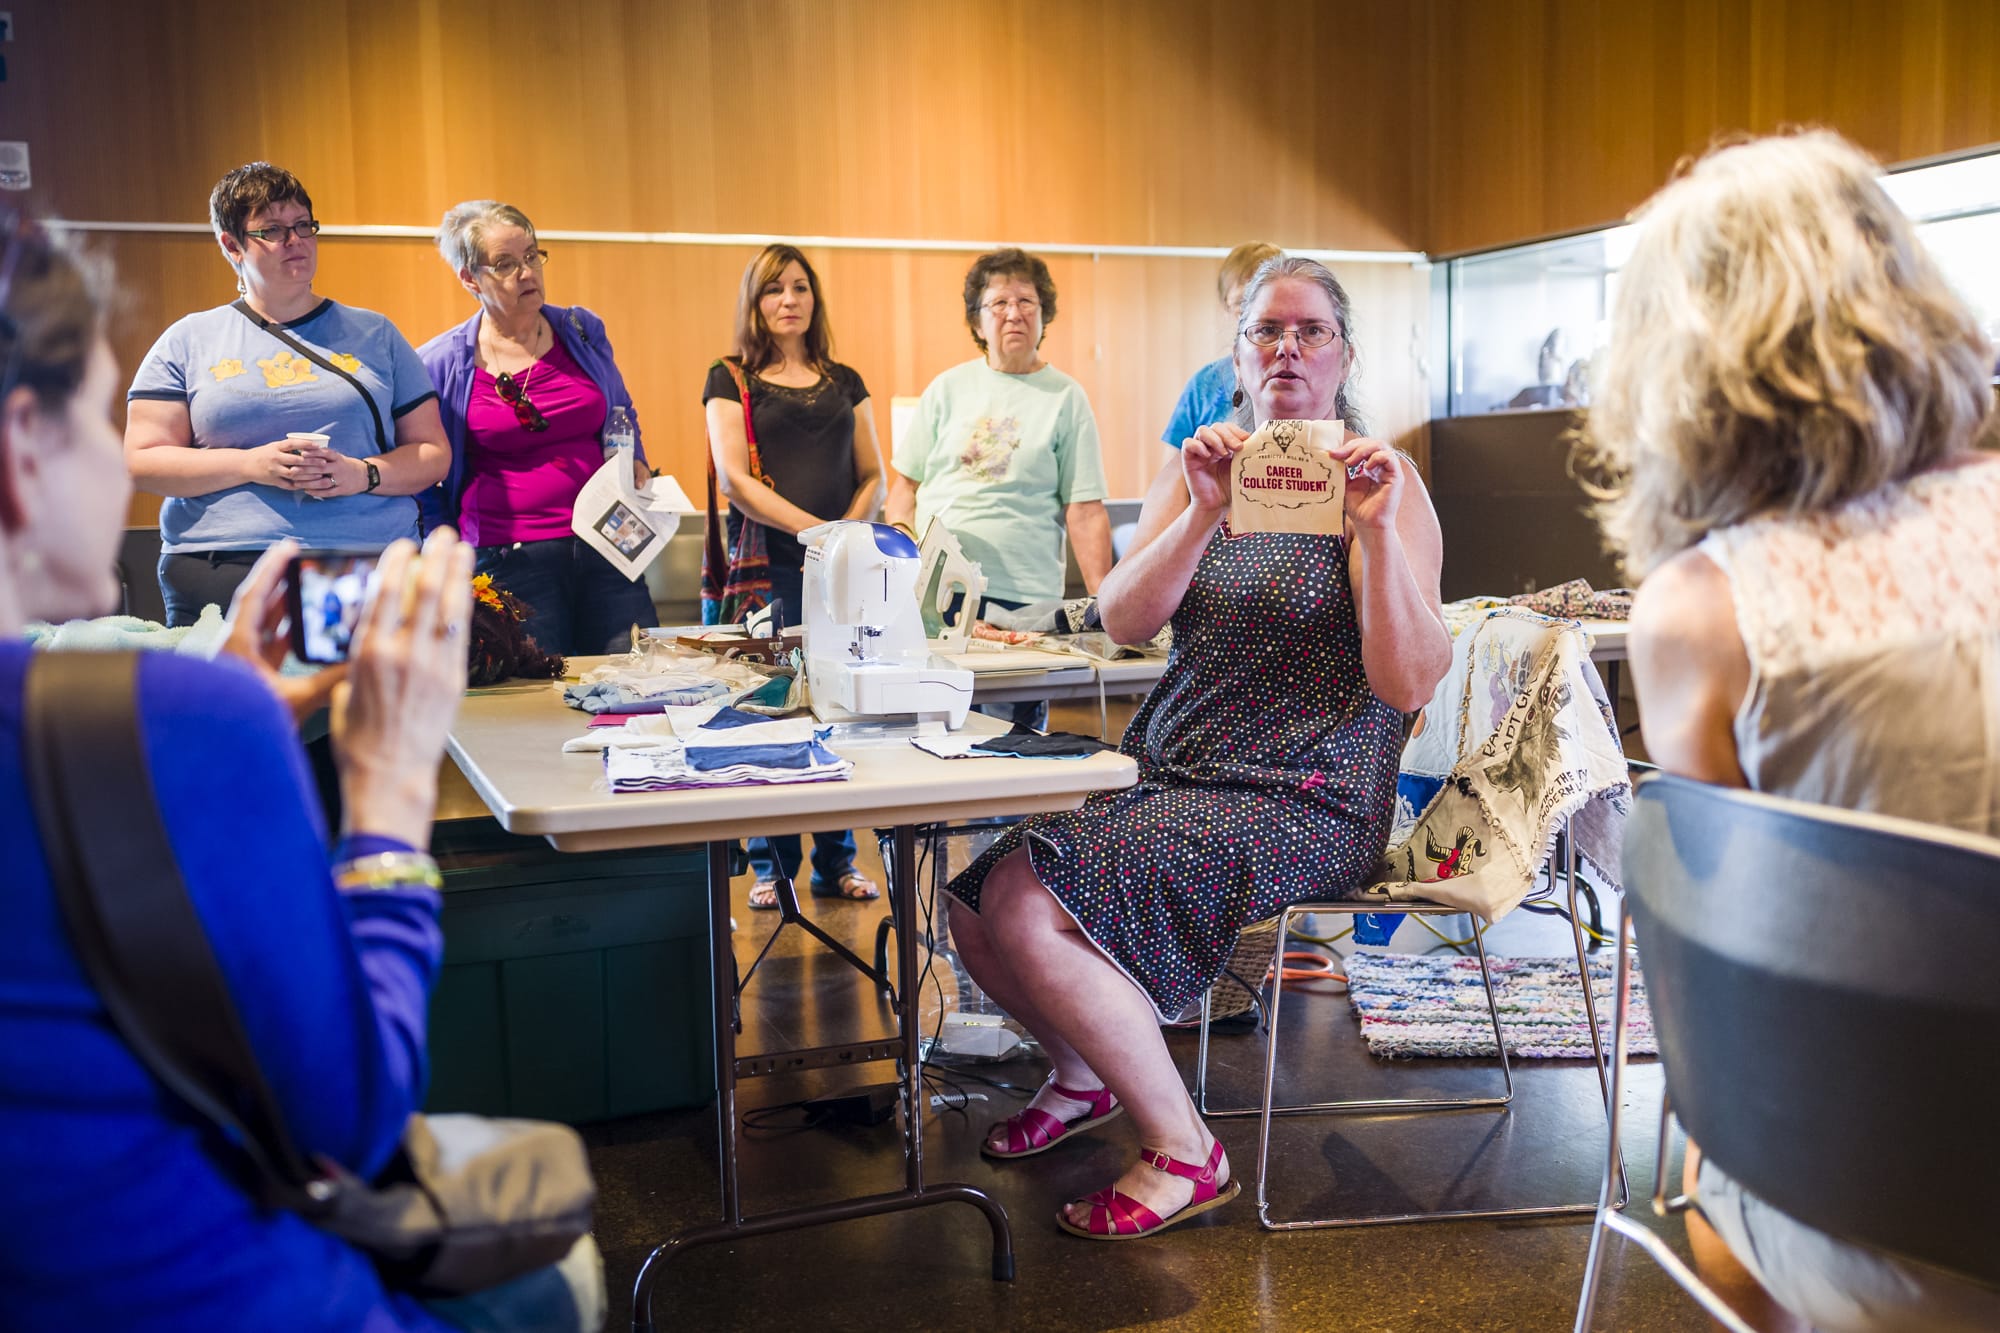 Marci Macfarlane explains how to make quilts from old t-shirts at the Vancouver Community Library Sunday during a workshop about how to repurpose vintage or used clothing into something more useful.